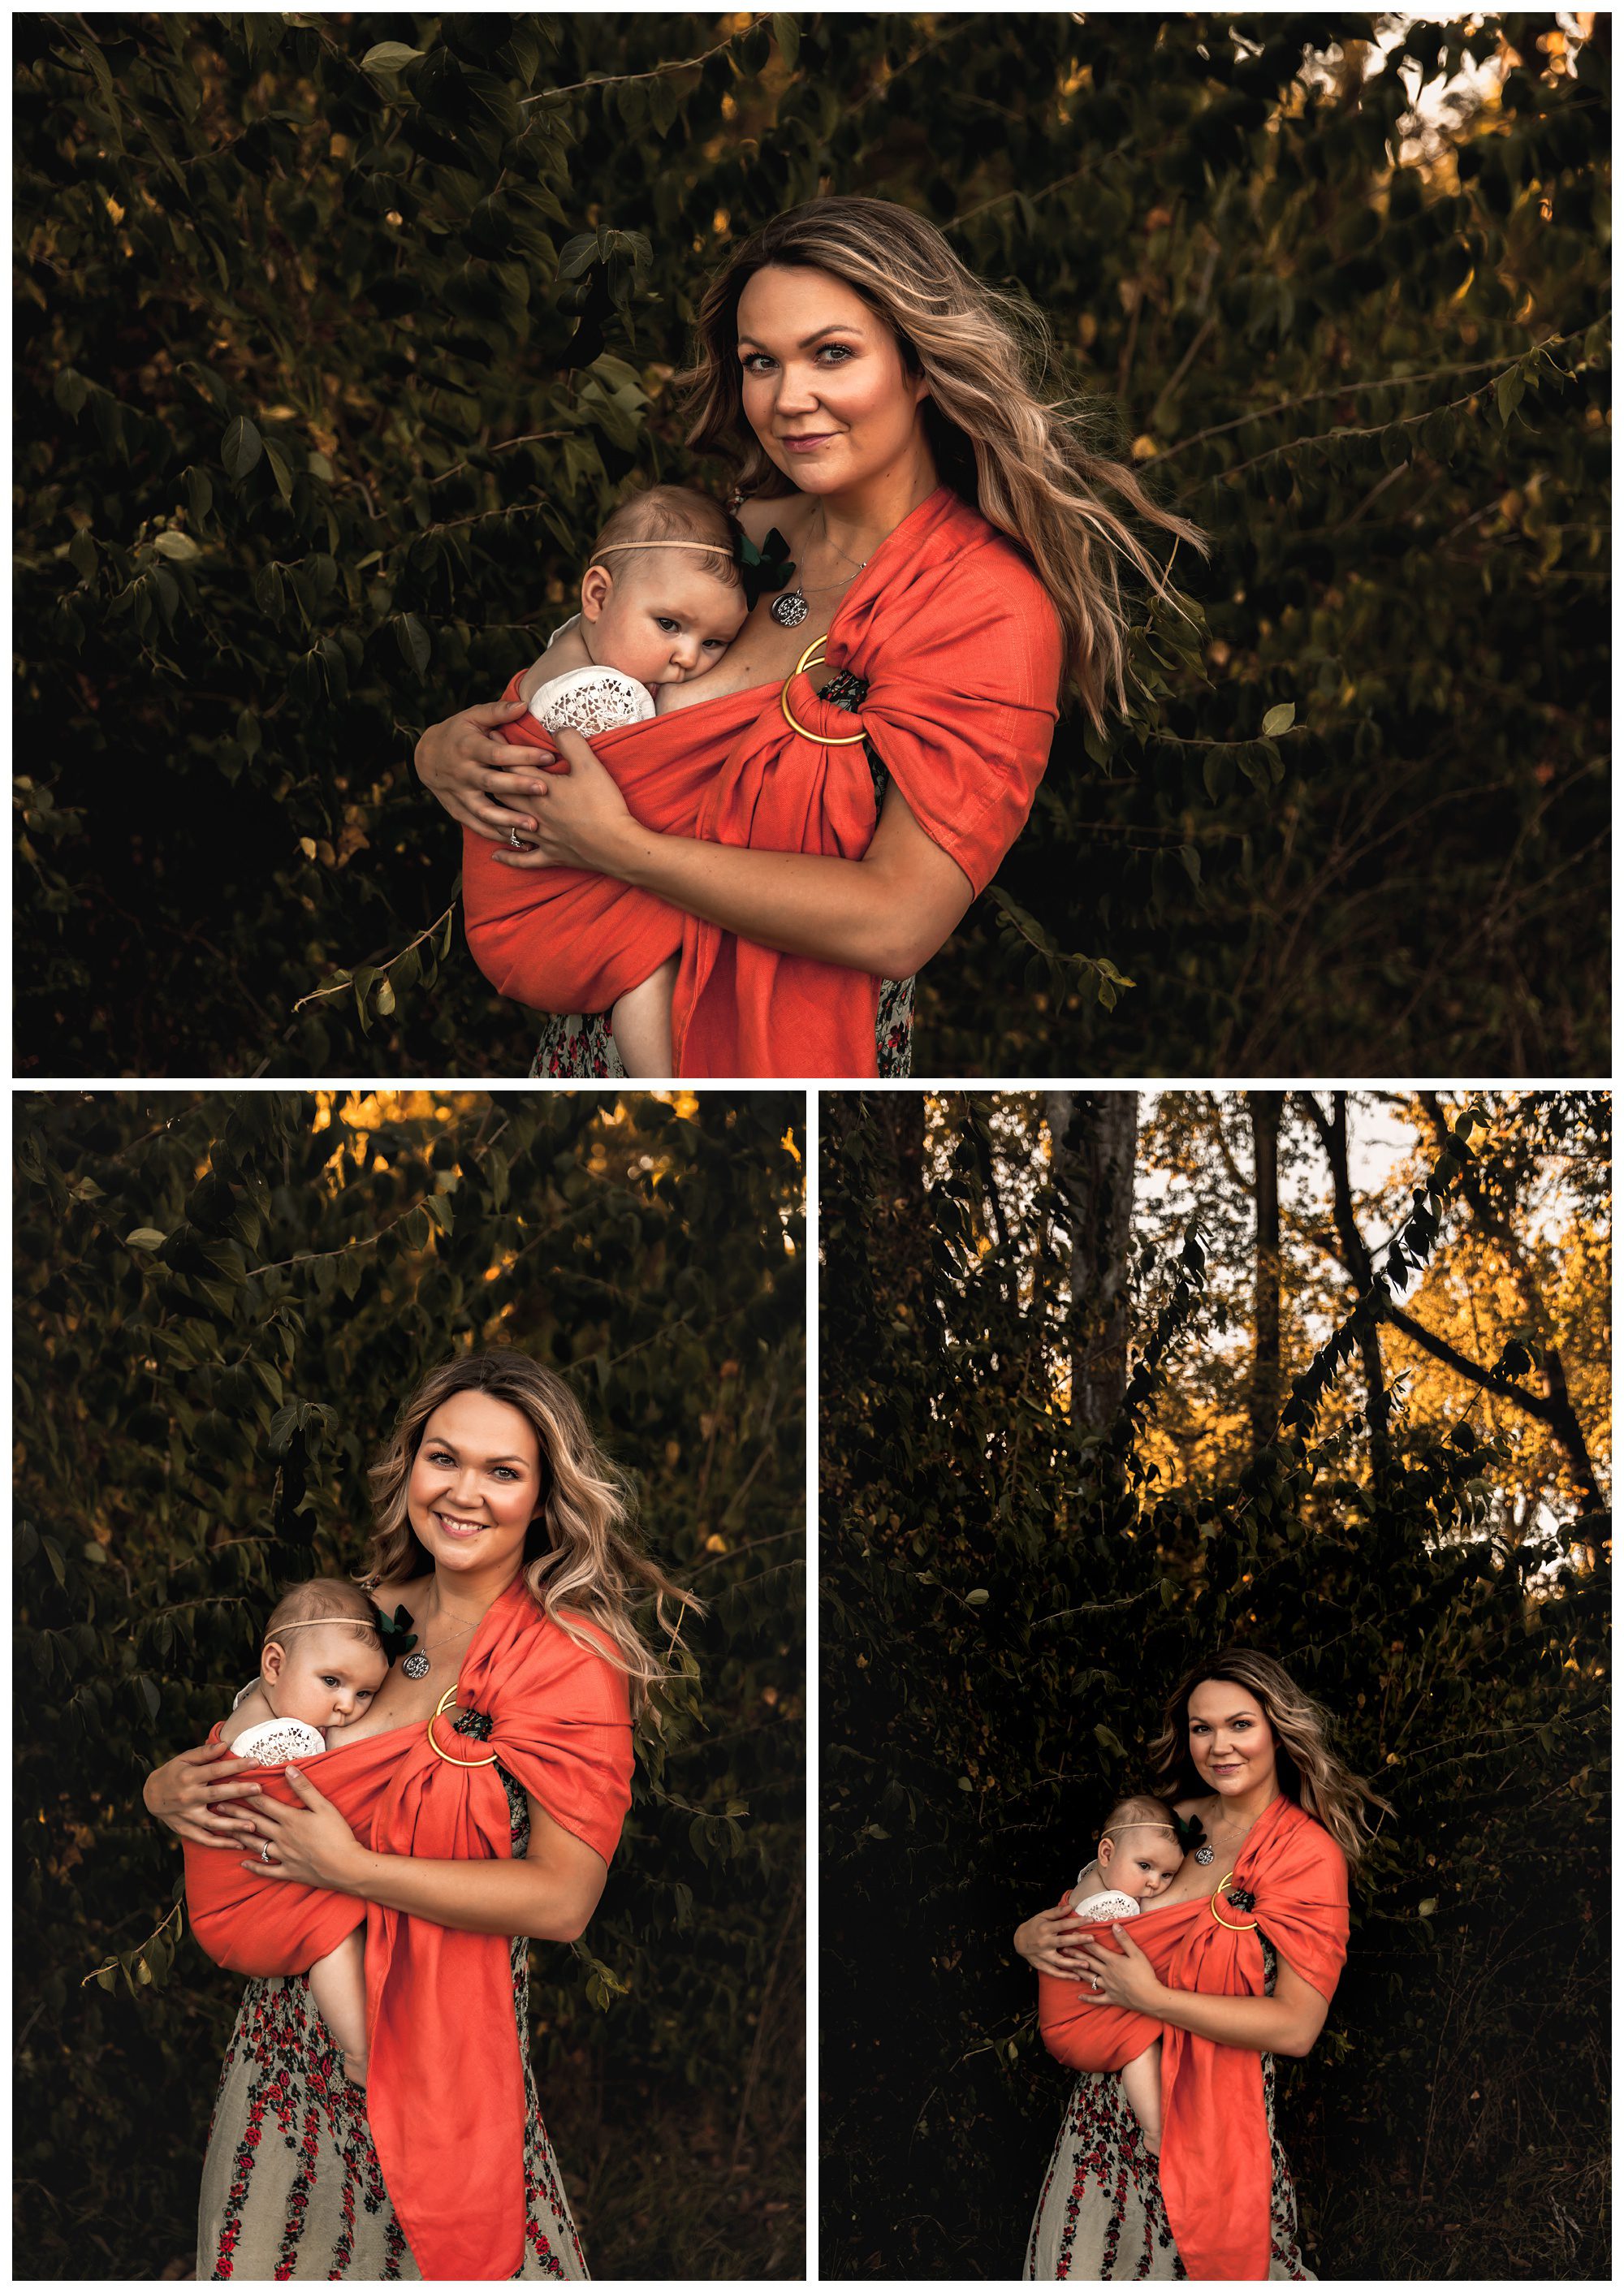 Breastfeeding photograph | Mommy and Me photography | Mother and child breastfeeding photo shoot | Murfreesboro, TN family photographer and motherhood photographer doing an outdoor breastfeeding session outside of Nashville, TN